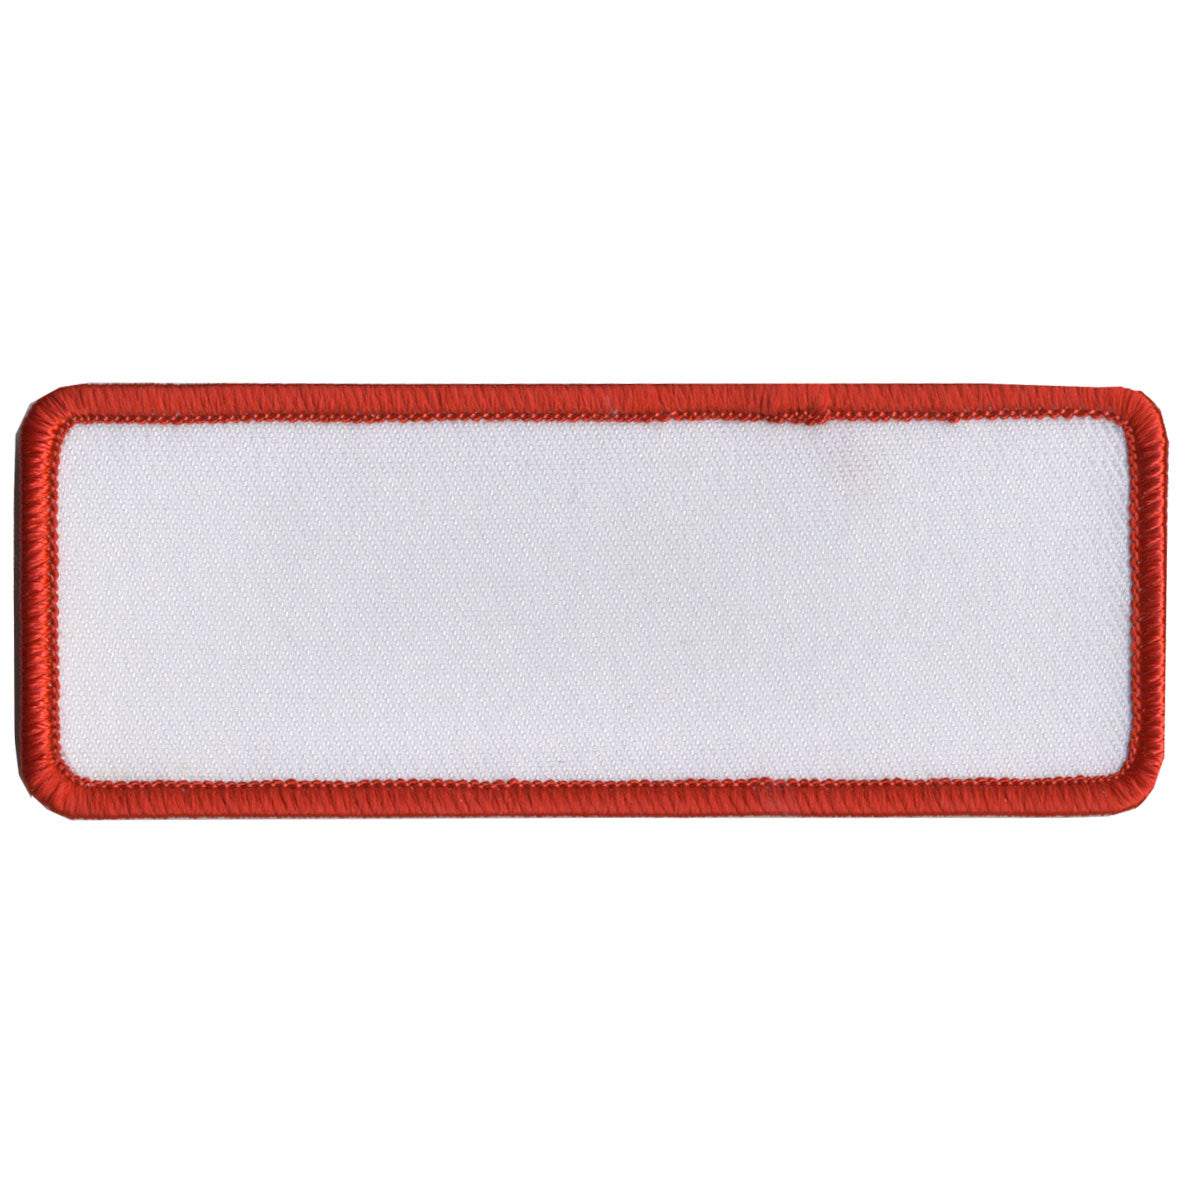 Hot Leathers PPP1006 Blank White with Red Trim 4" x 1.5" Patch